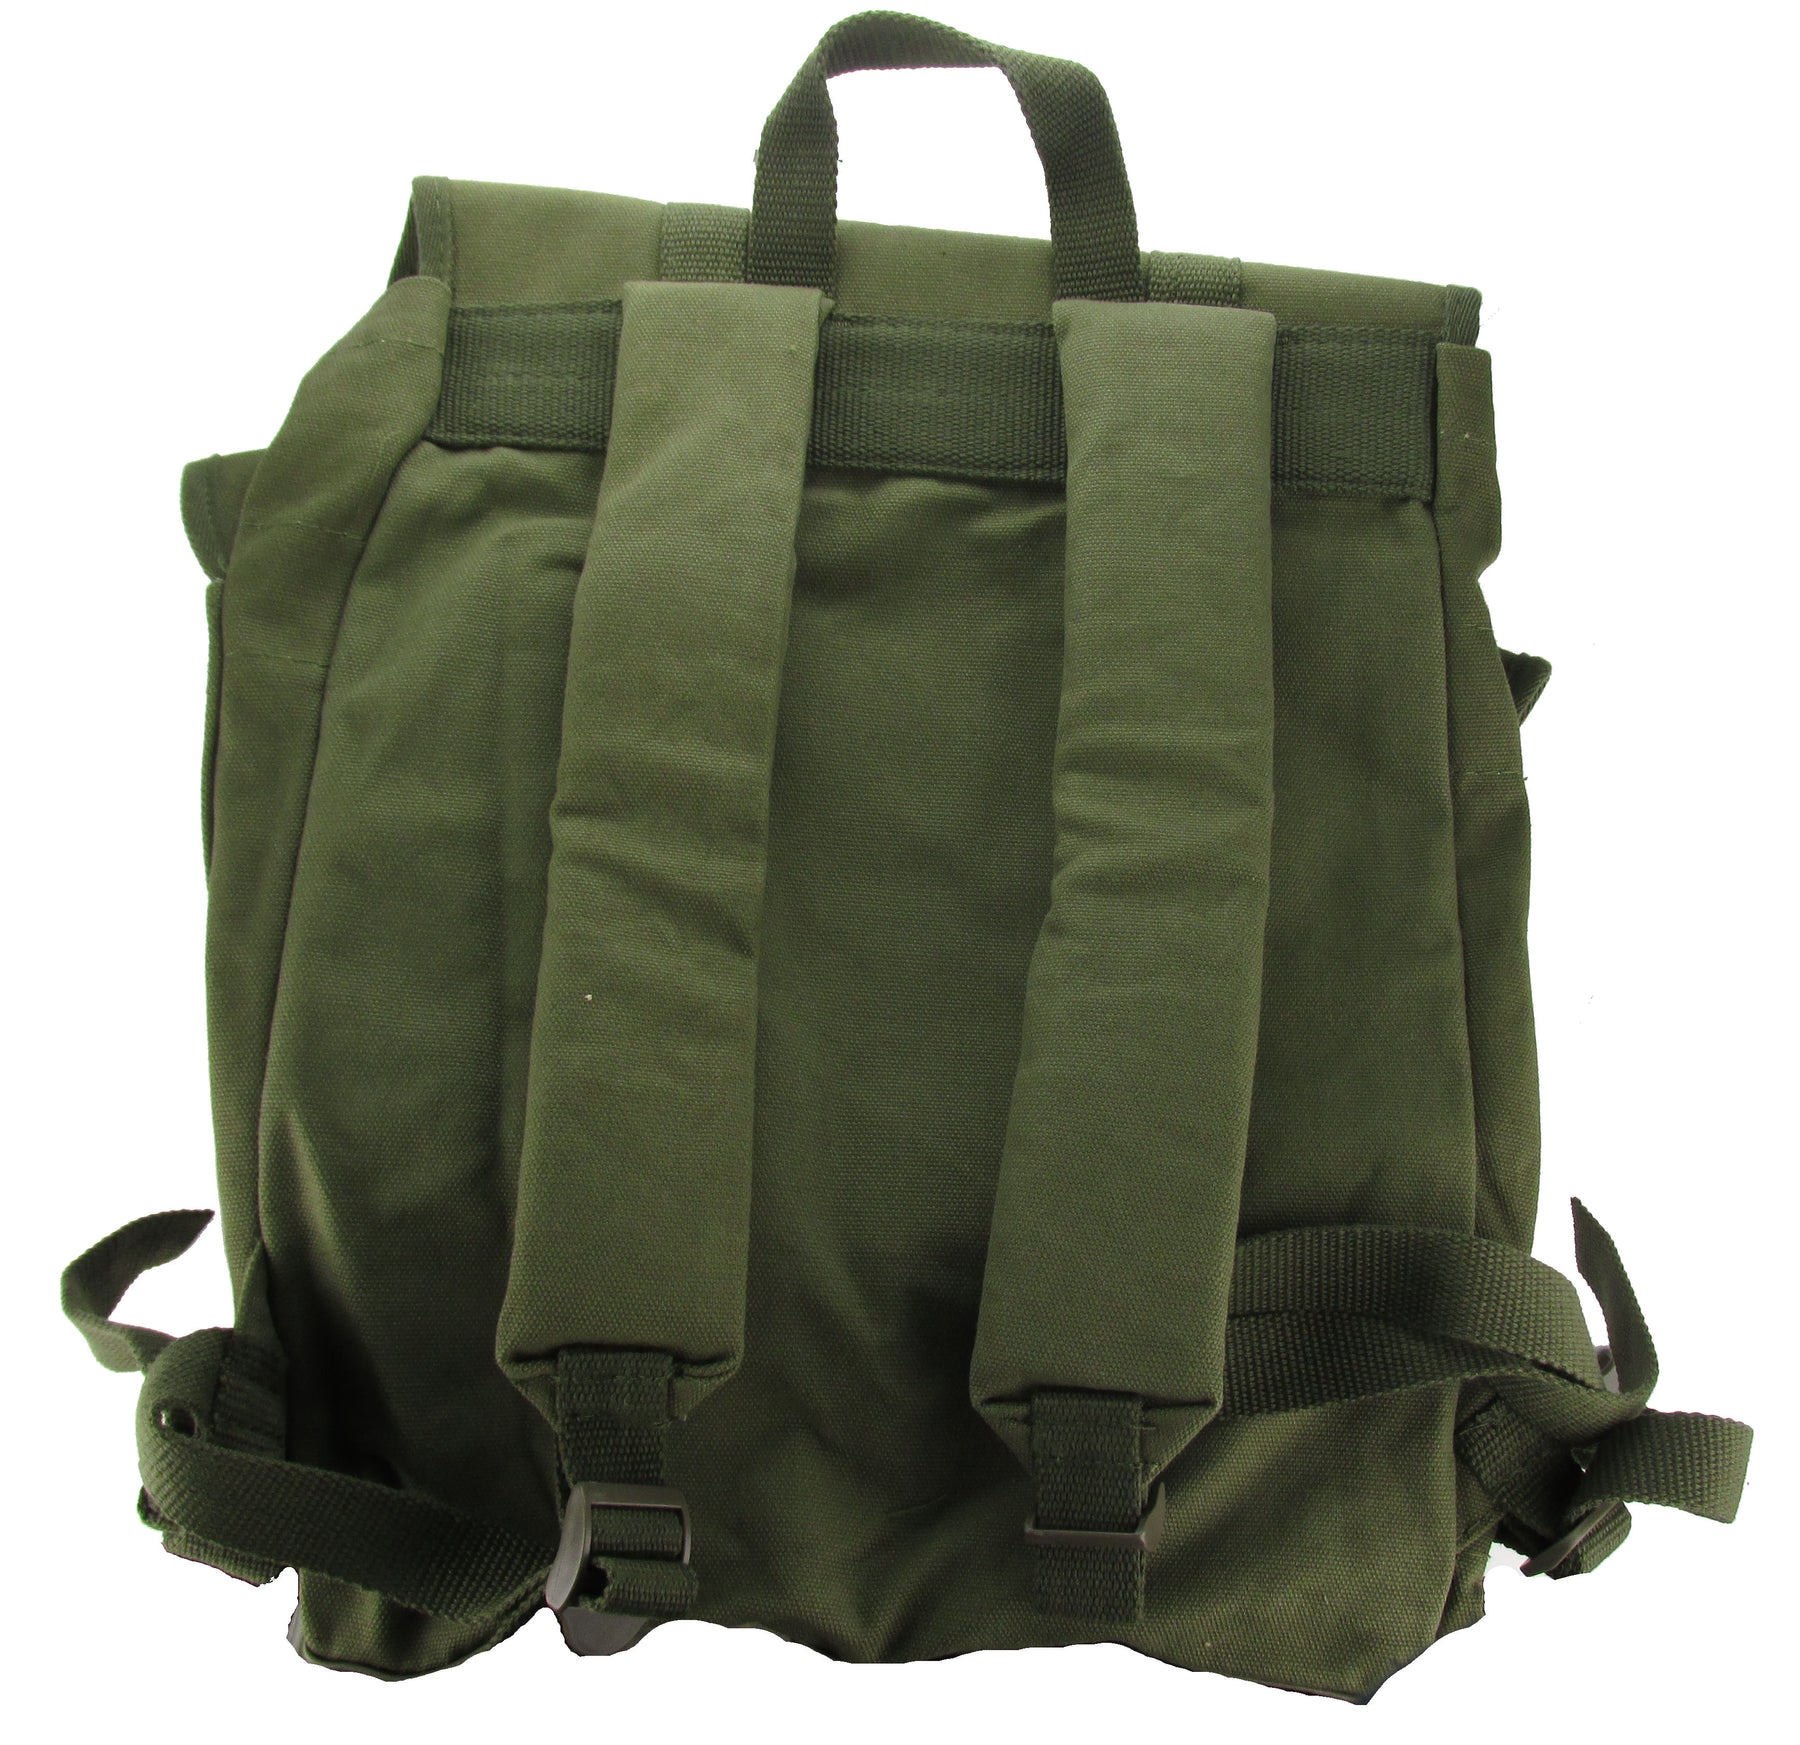 German Army Style Bundeswehr Mountain Backpack - OD Green